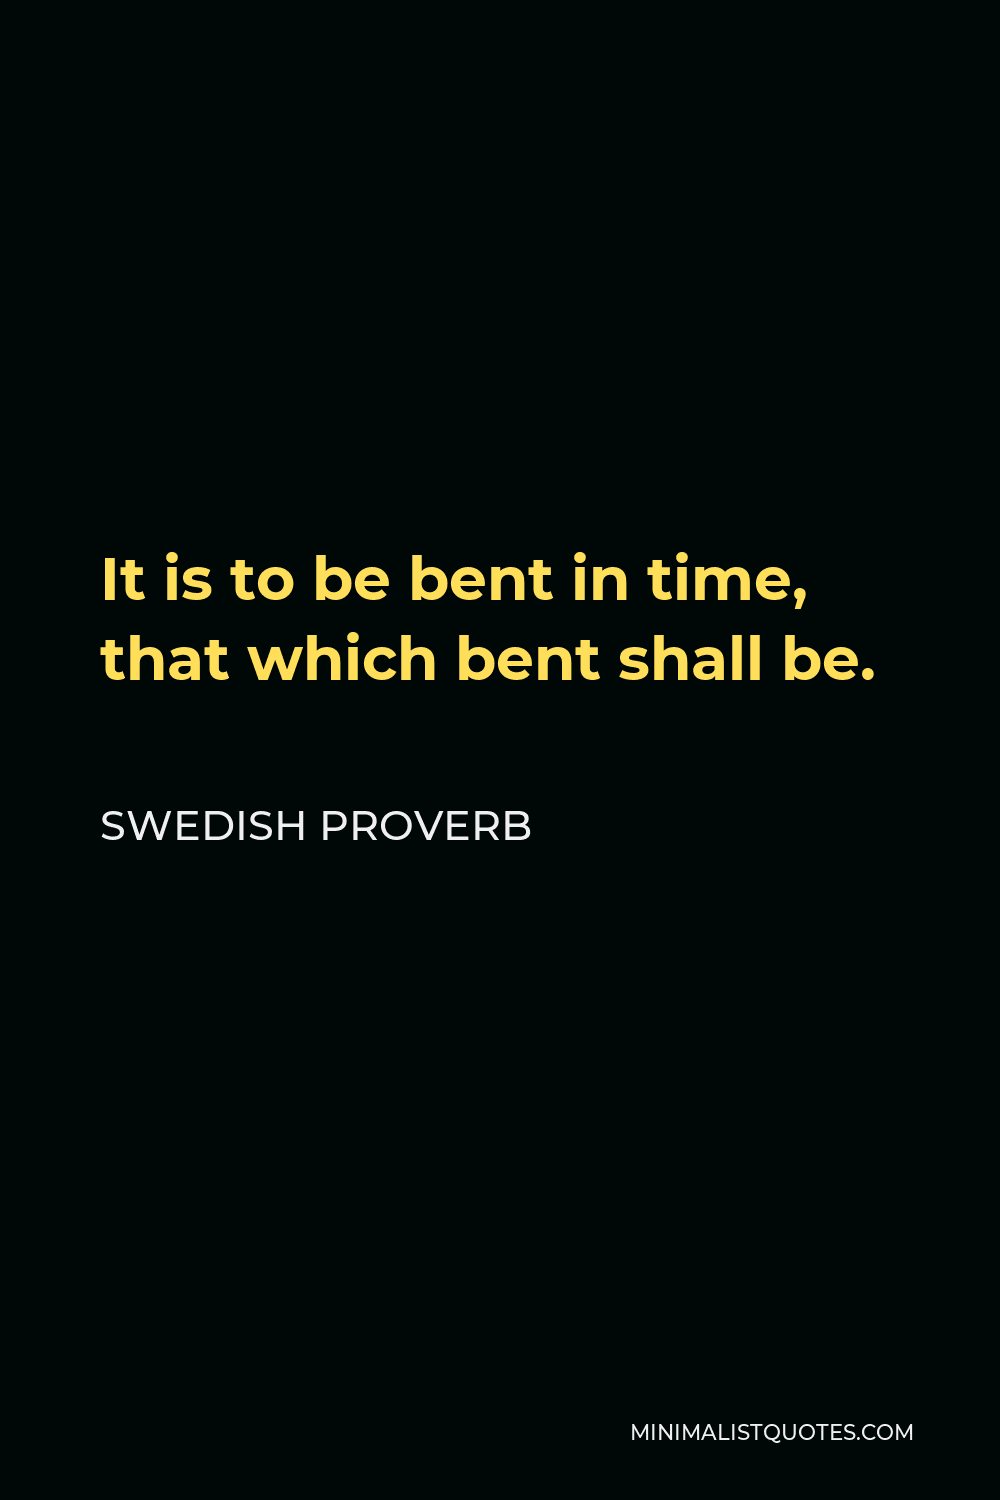 Swedish Proverb Quote - It is to be bent in time, that which bent shall be.